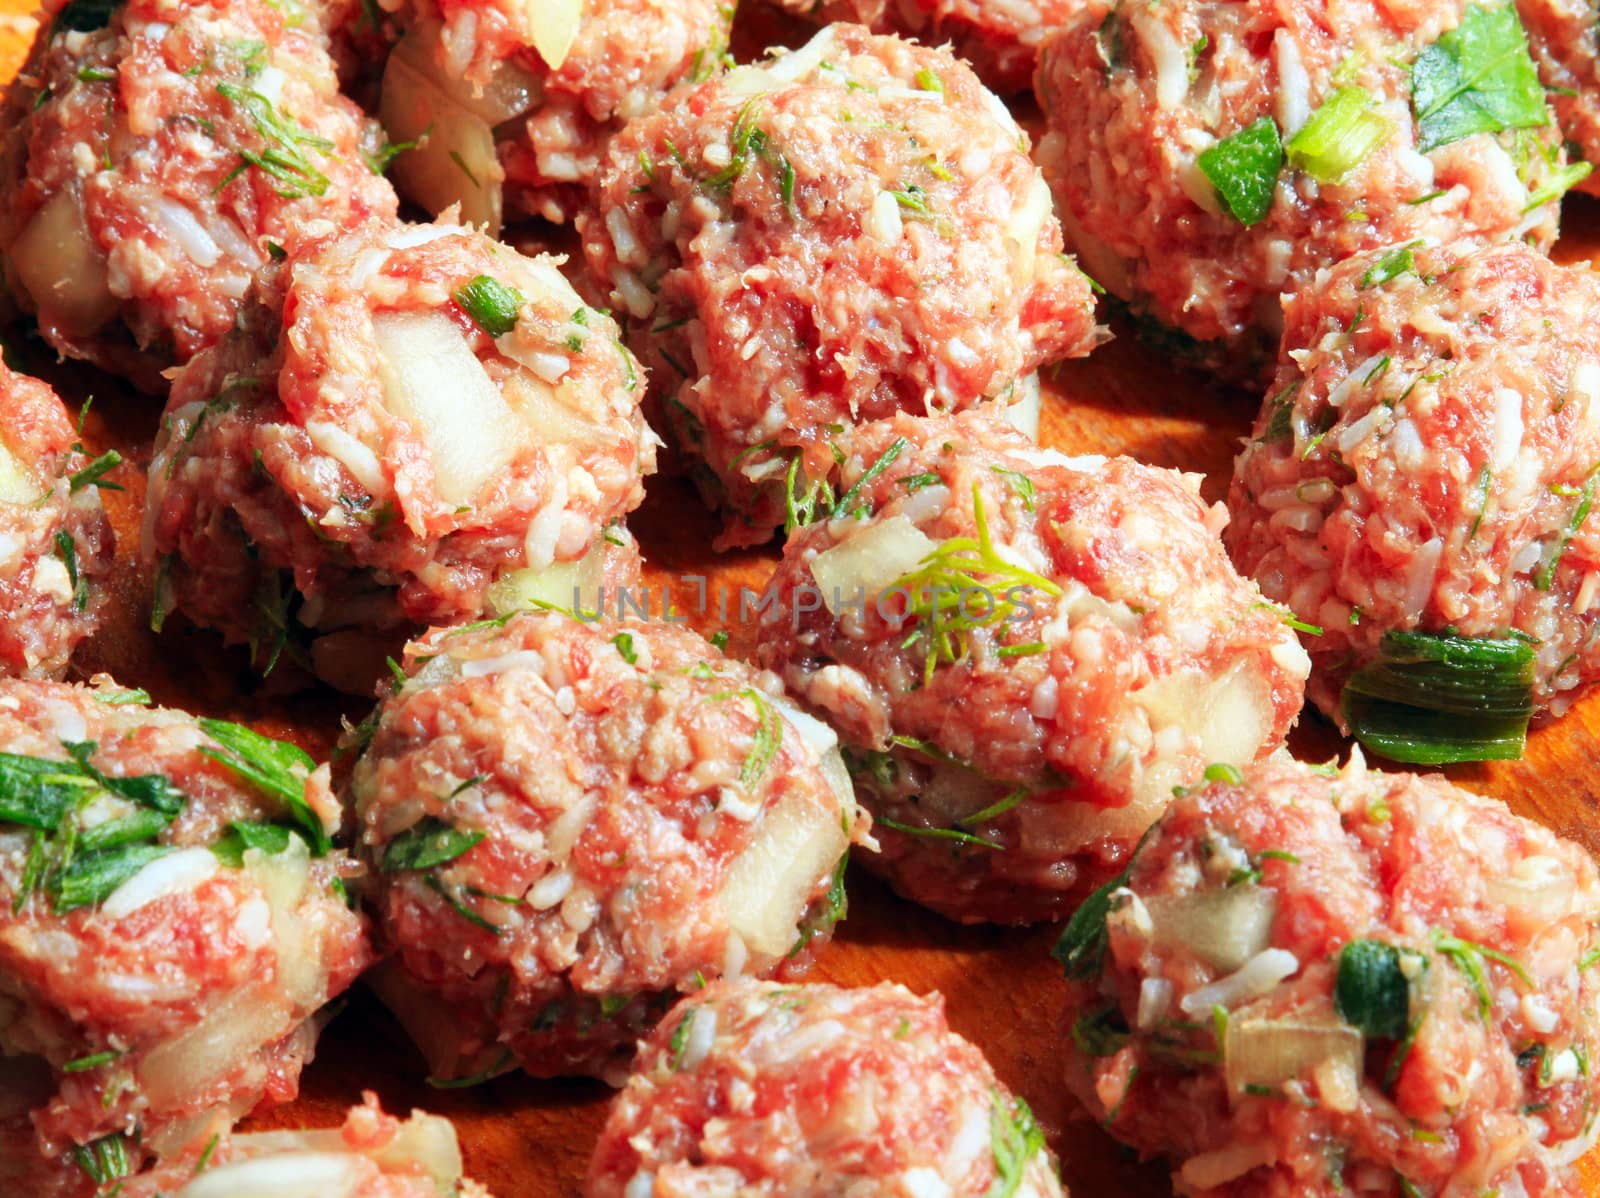 Raw meatballs on the chopping board
